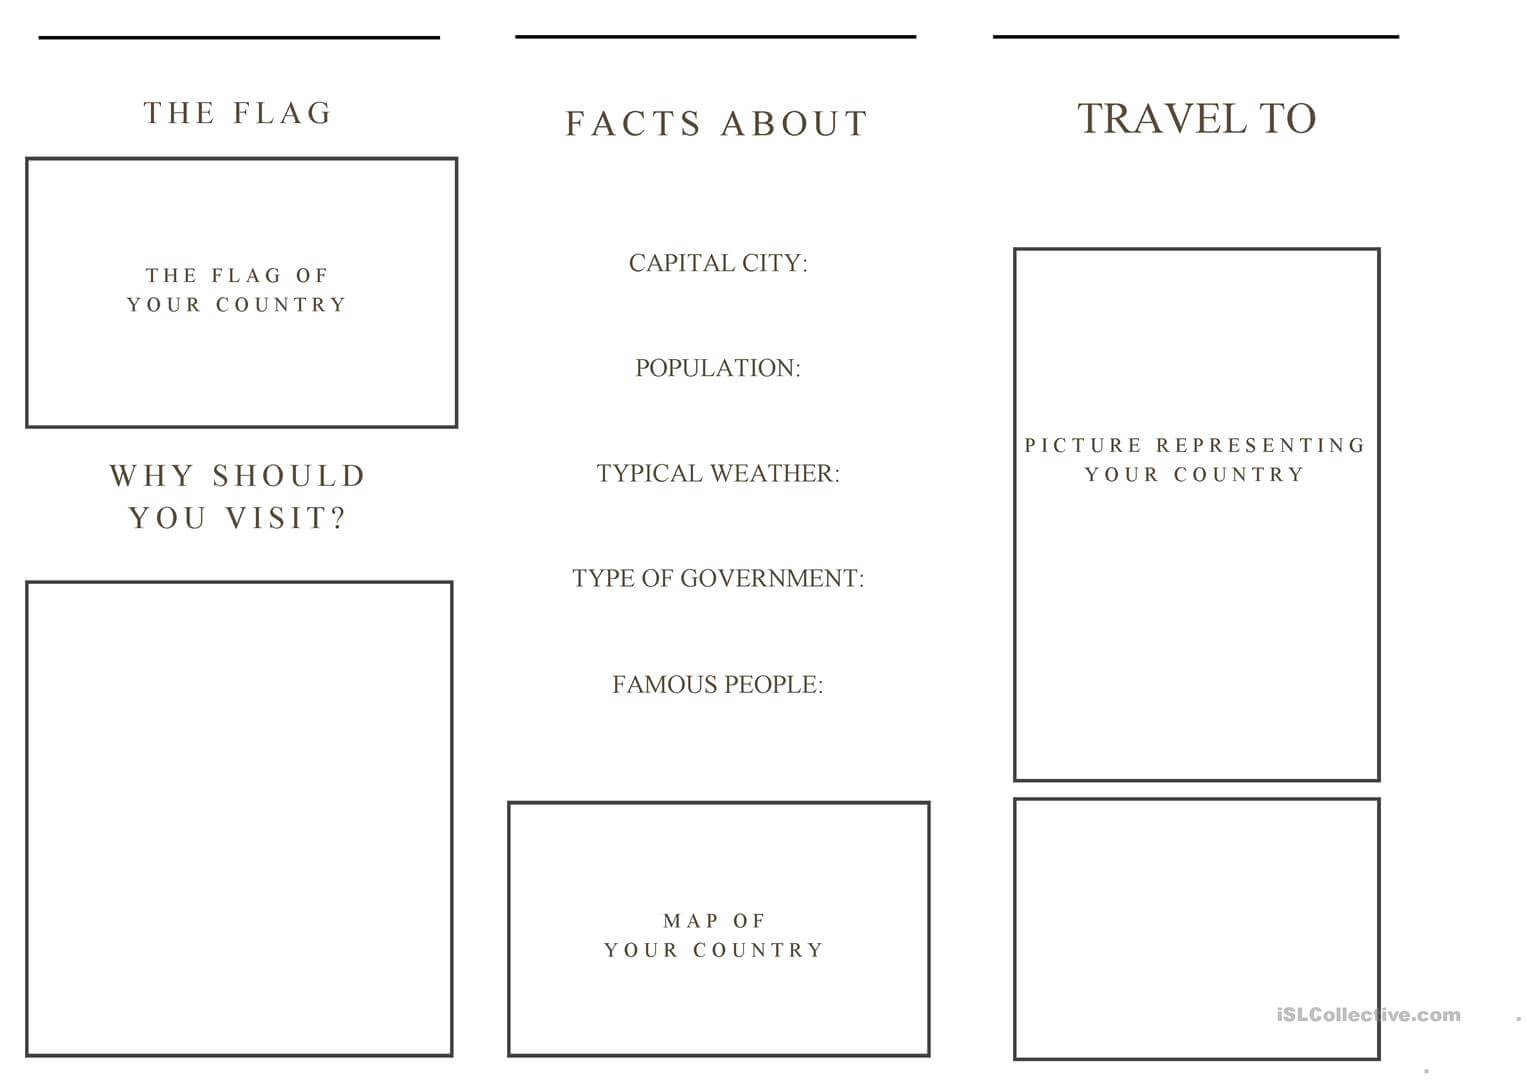 Travel Brochure Template And Example Brochure - English Esl In Travel Brochure Template For Students